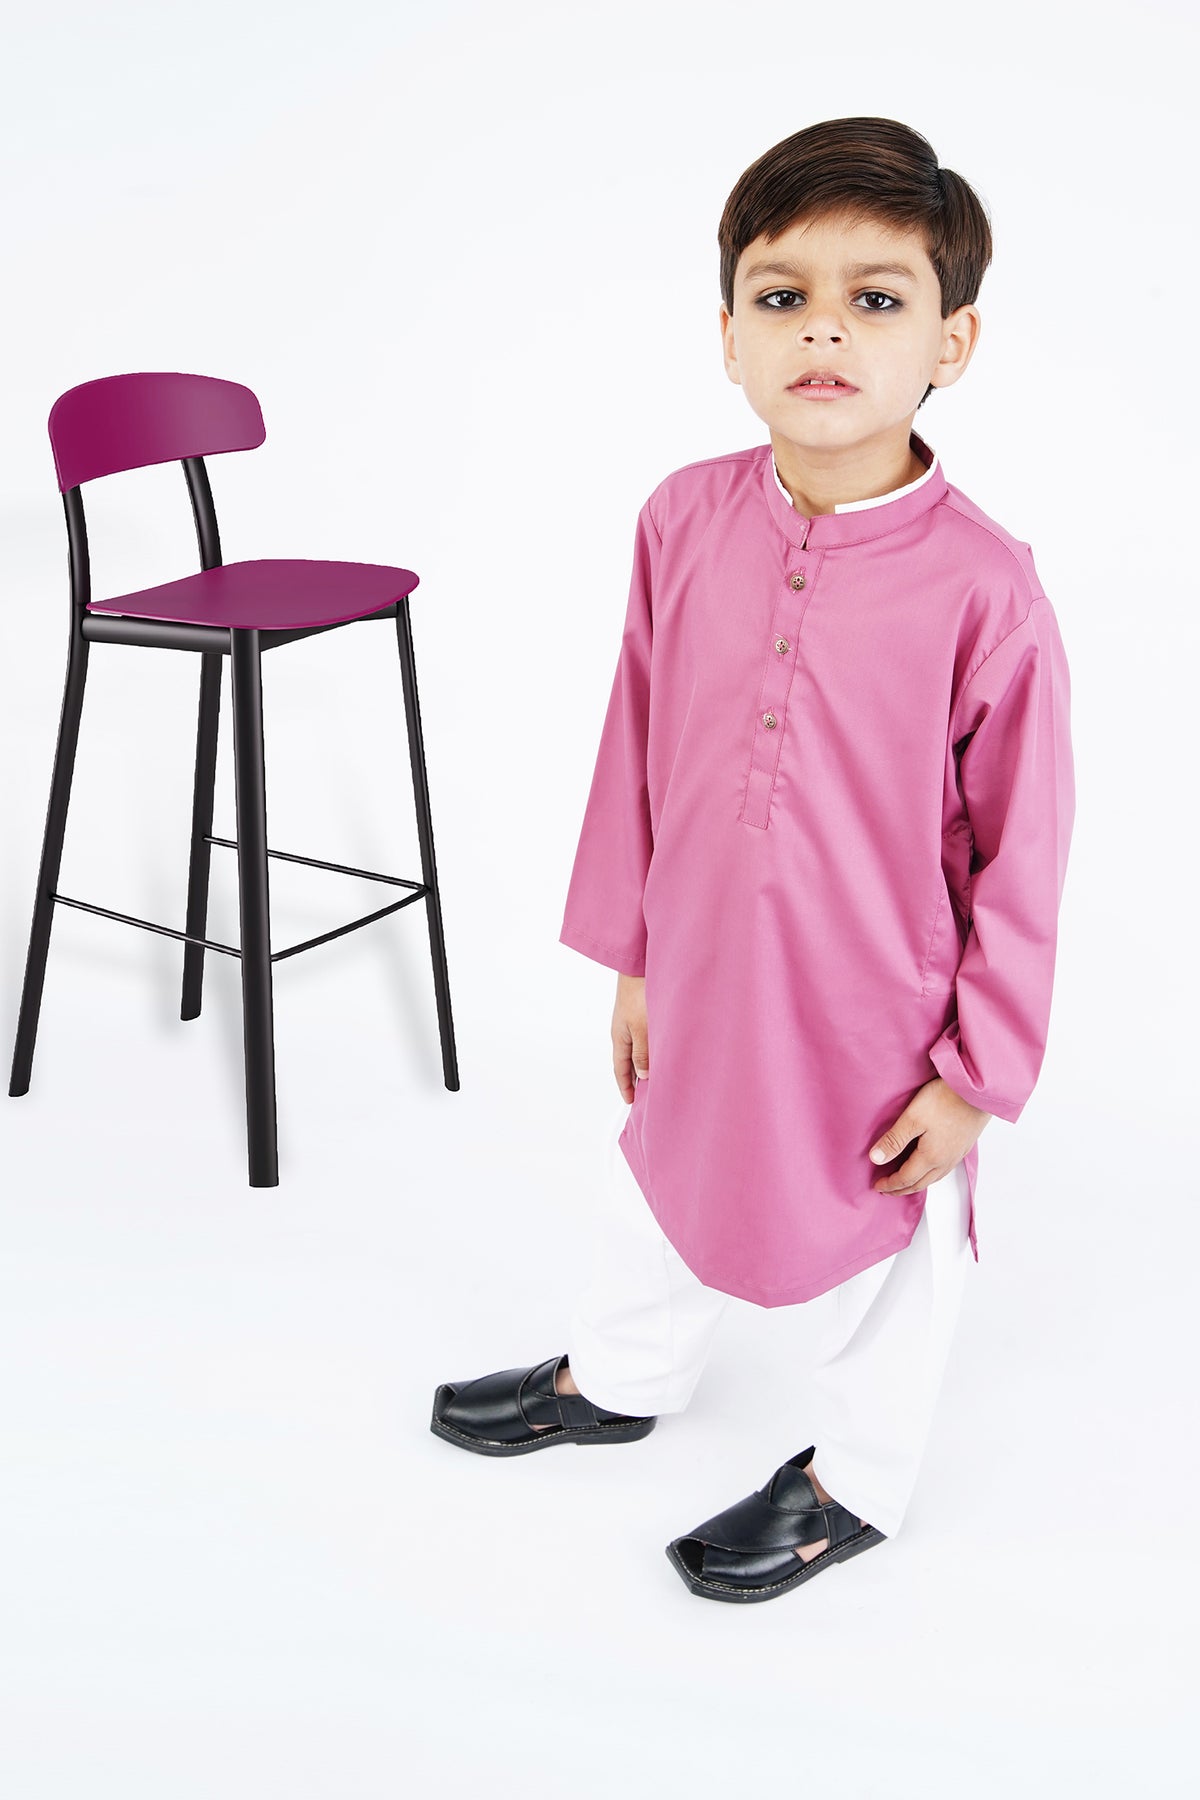 BOYS SUIT BASIC PINK AND WHITE